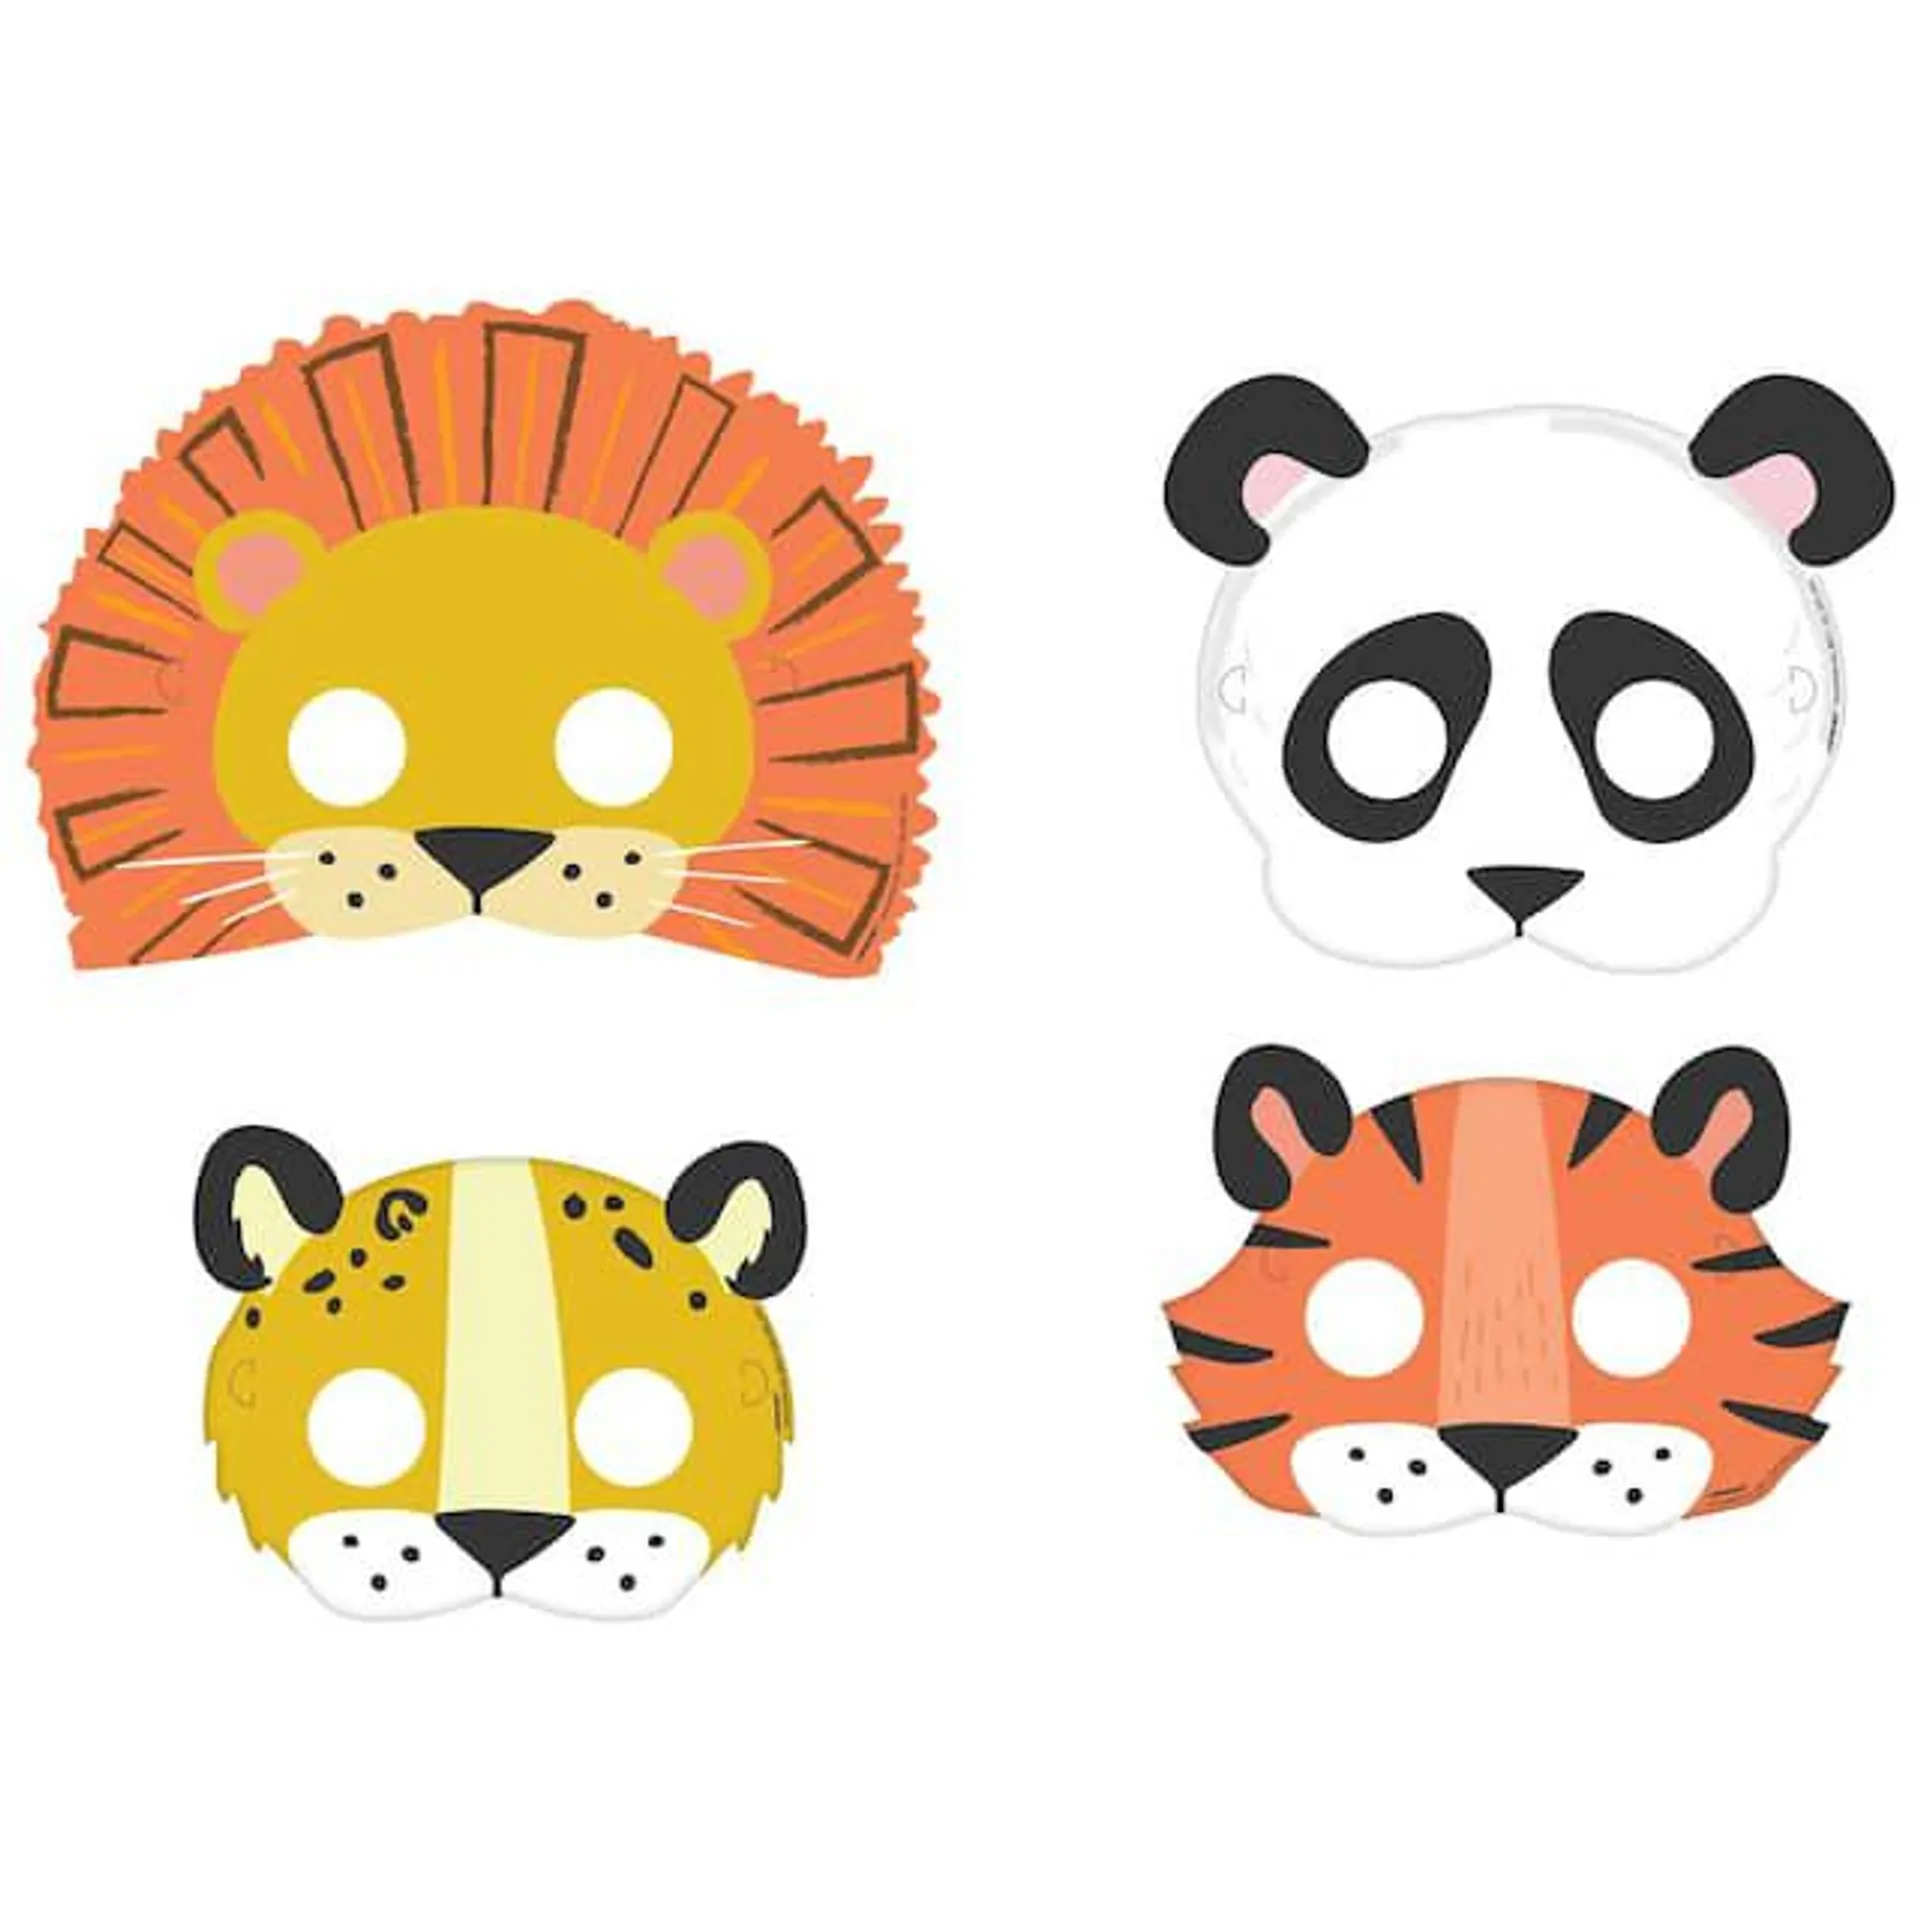 Get Wild Lion/Cheetah/Tiger/Panda Jungle Animal Masks, Multi-Coloured, One Size, Wearable Costume Accessory for Birthdays